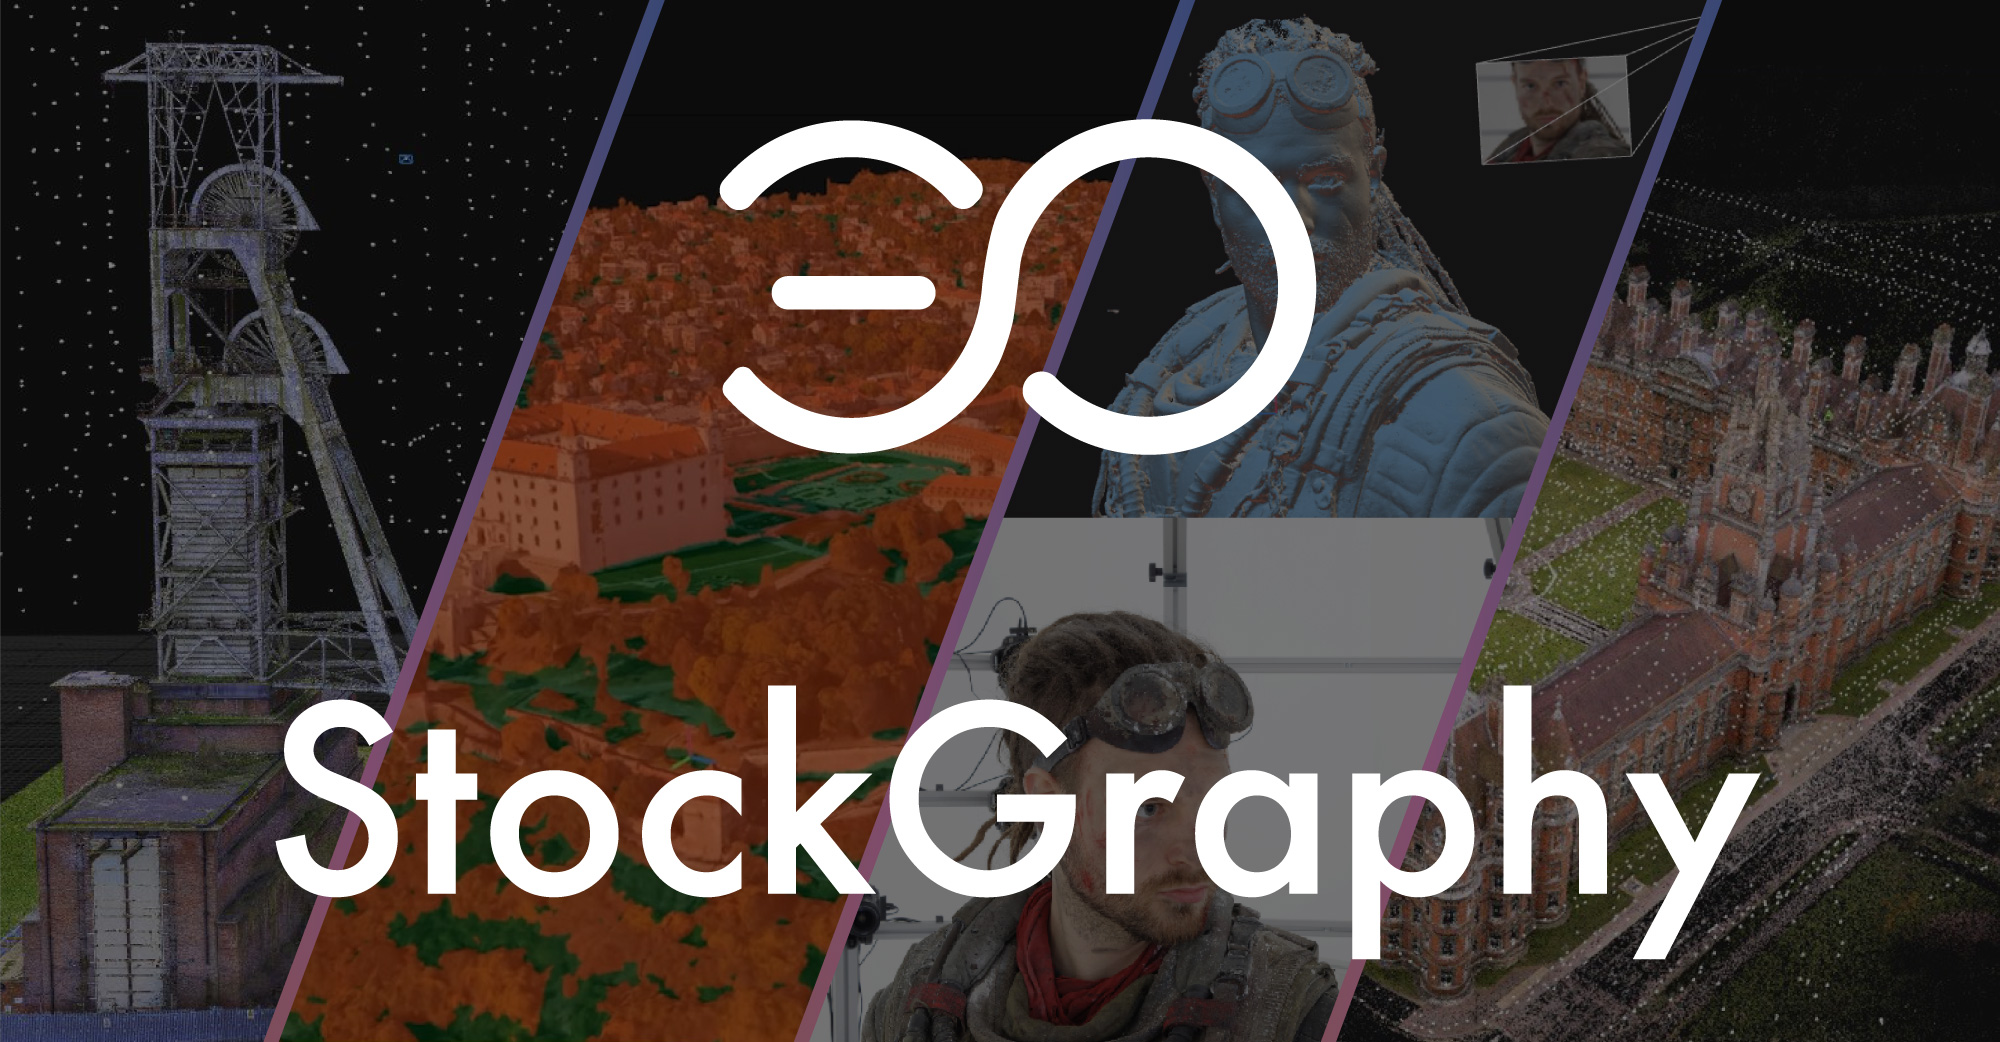 StockGraphy and Japan 3D printer conclude sales partnership agreement of RealityCapture.